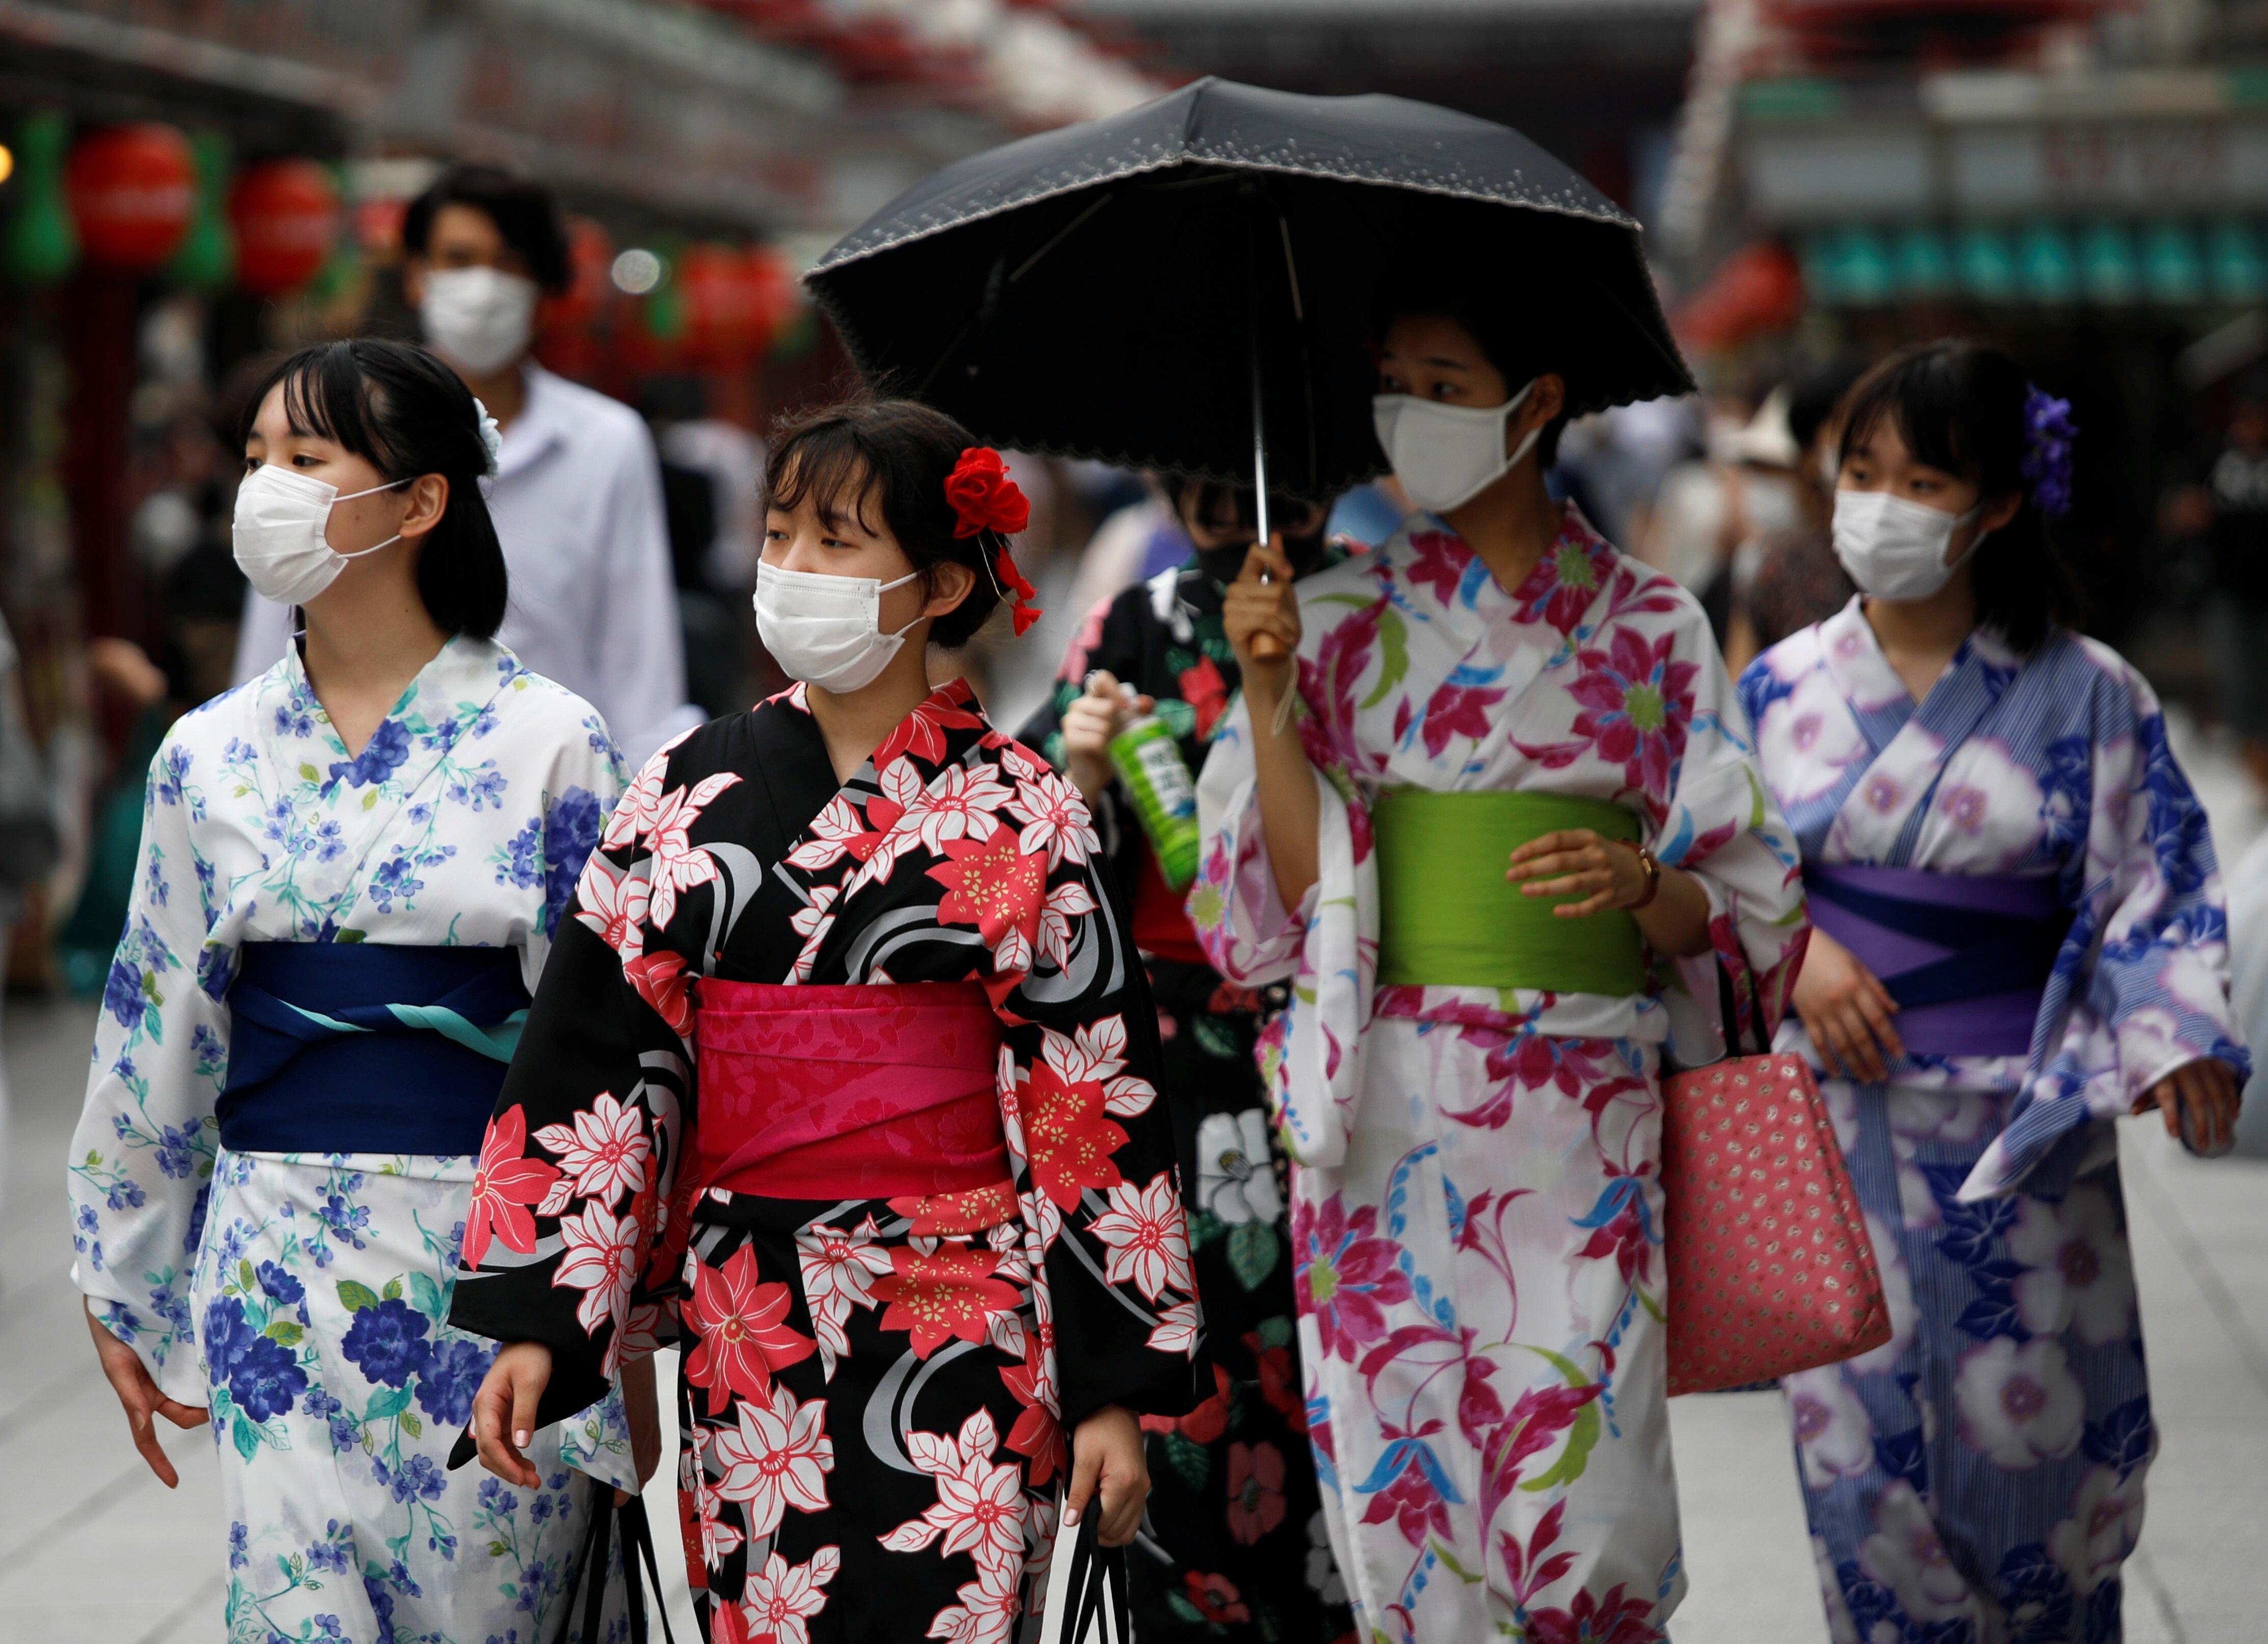 Japanese women account for a majority of the nation’s population and its workforce. Photo: Reuters